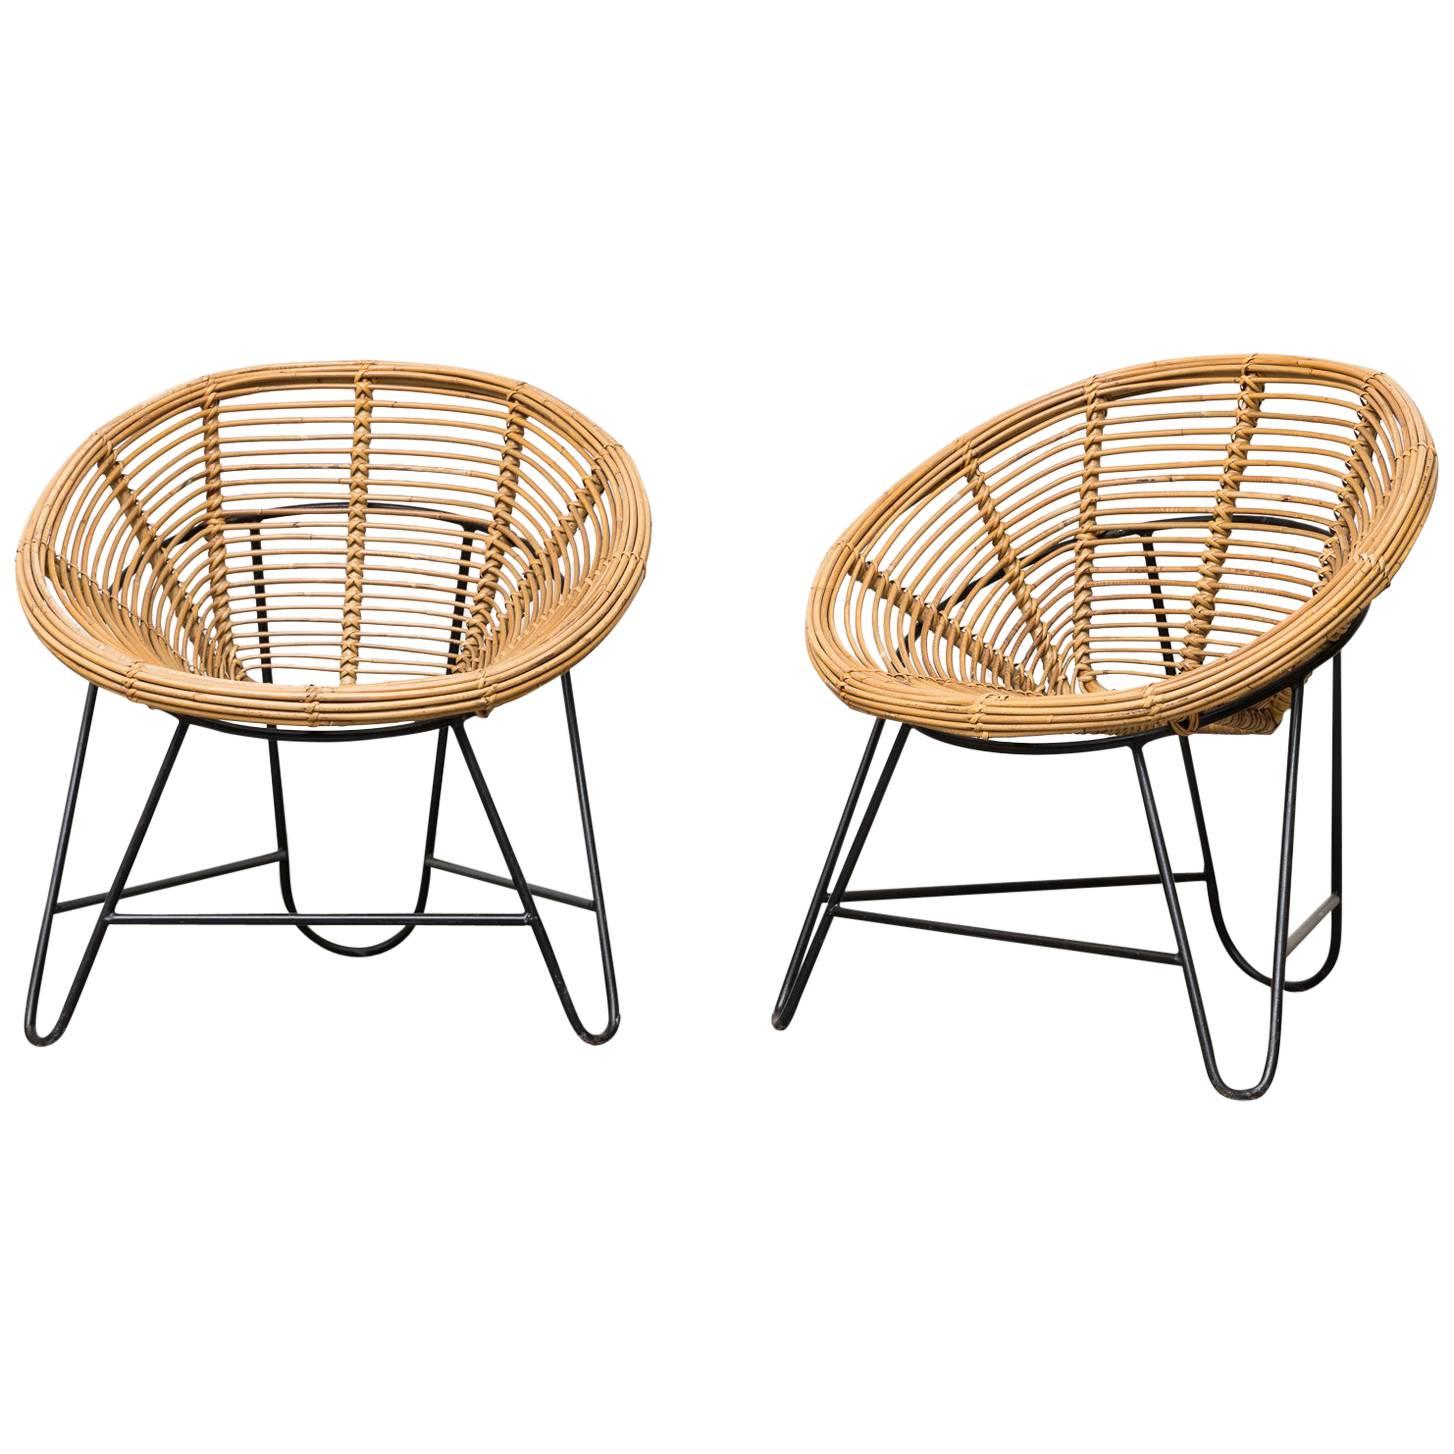 Pair of Onion Skin Patterned Bamboo Hoop Chairs